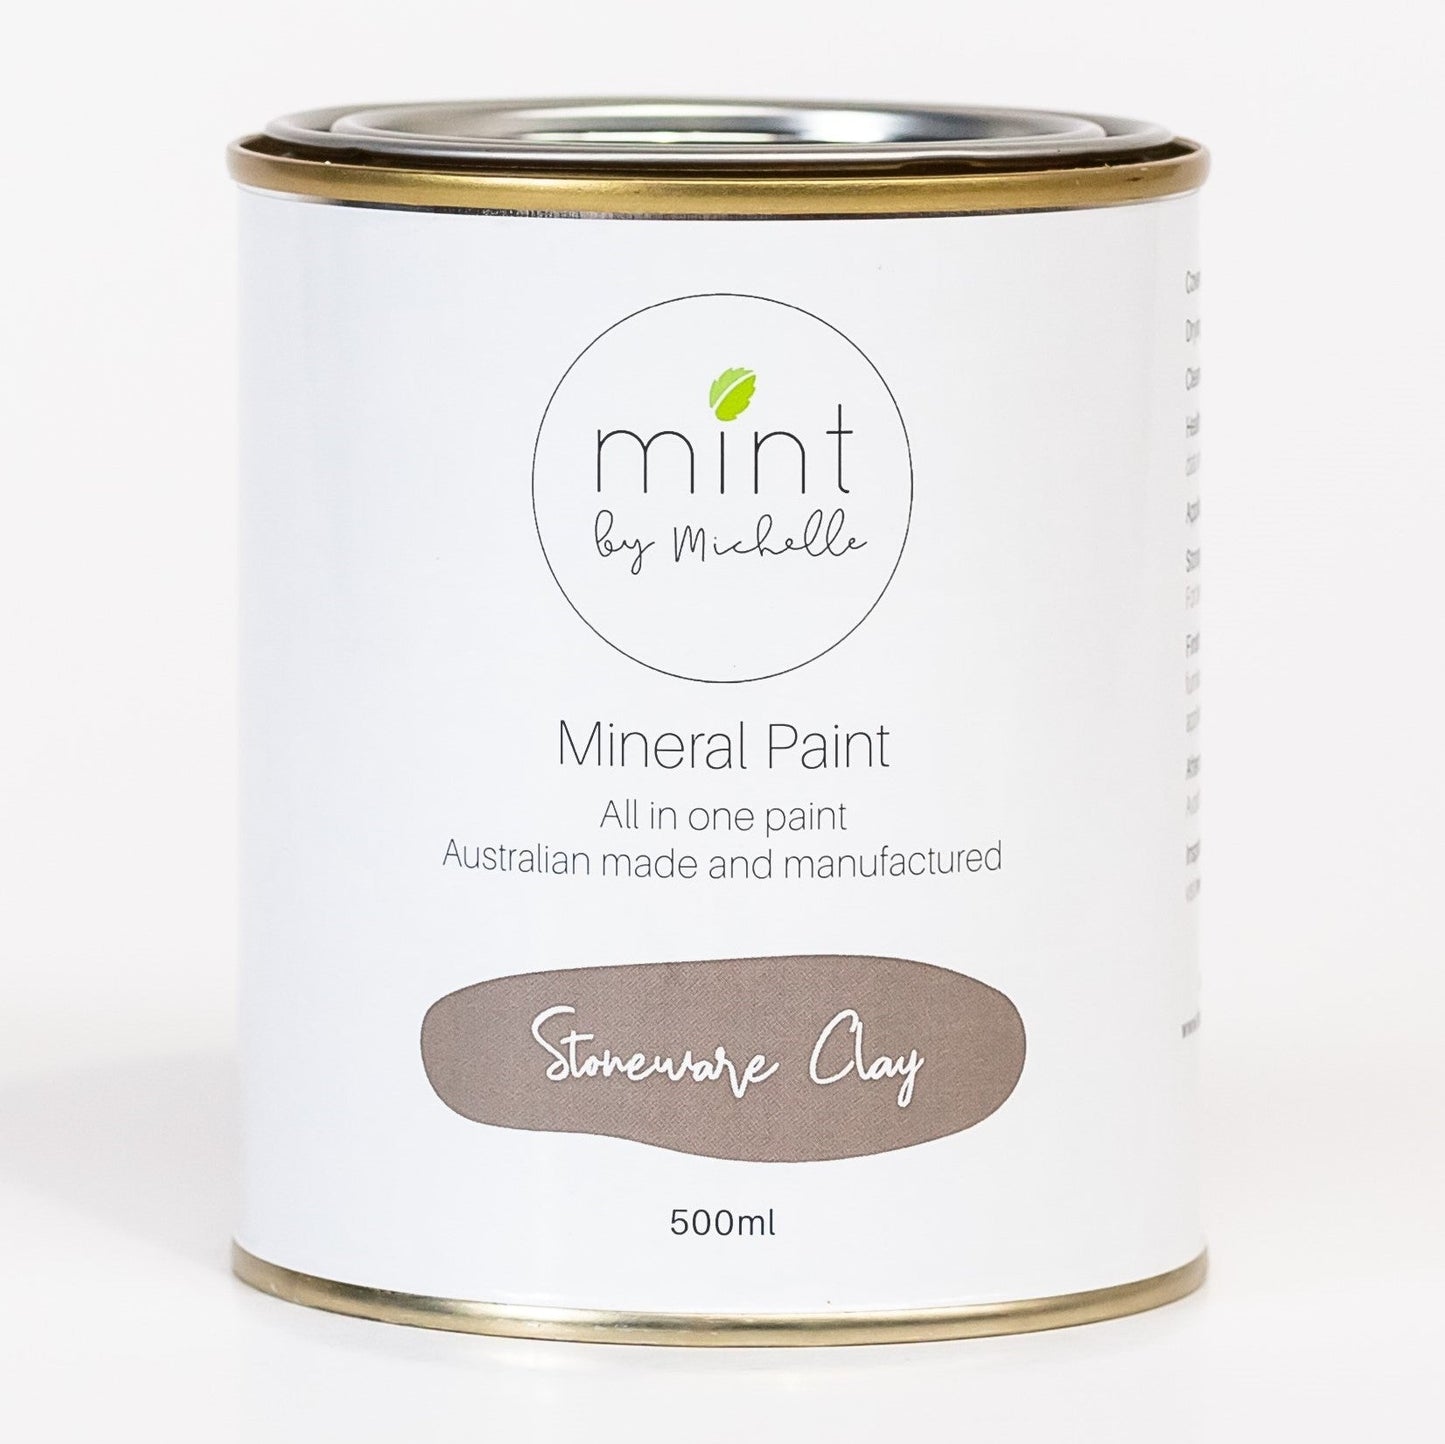 Stoneware Clay Mineral Paint